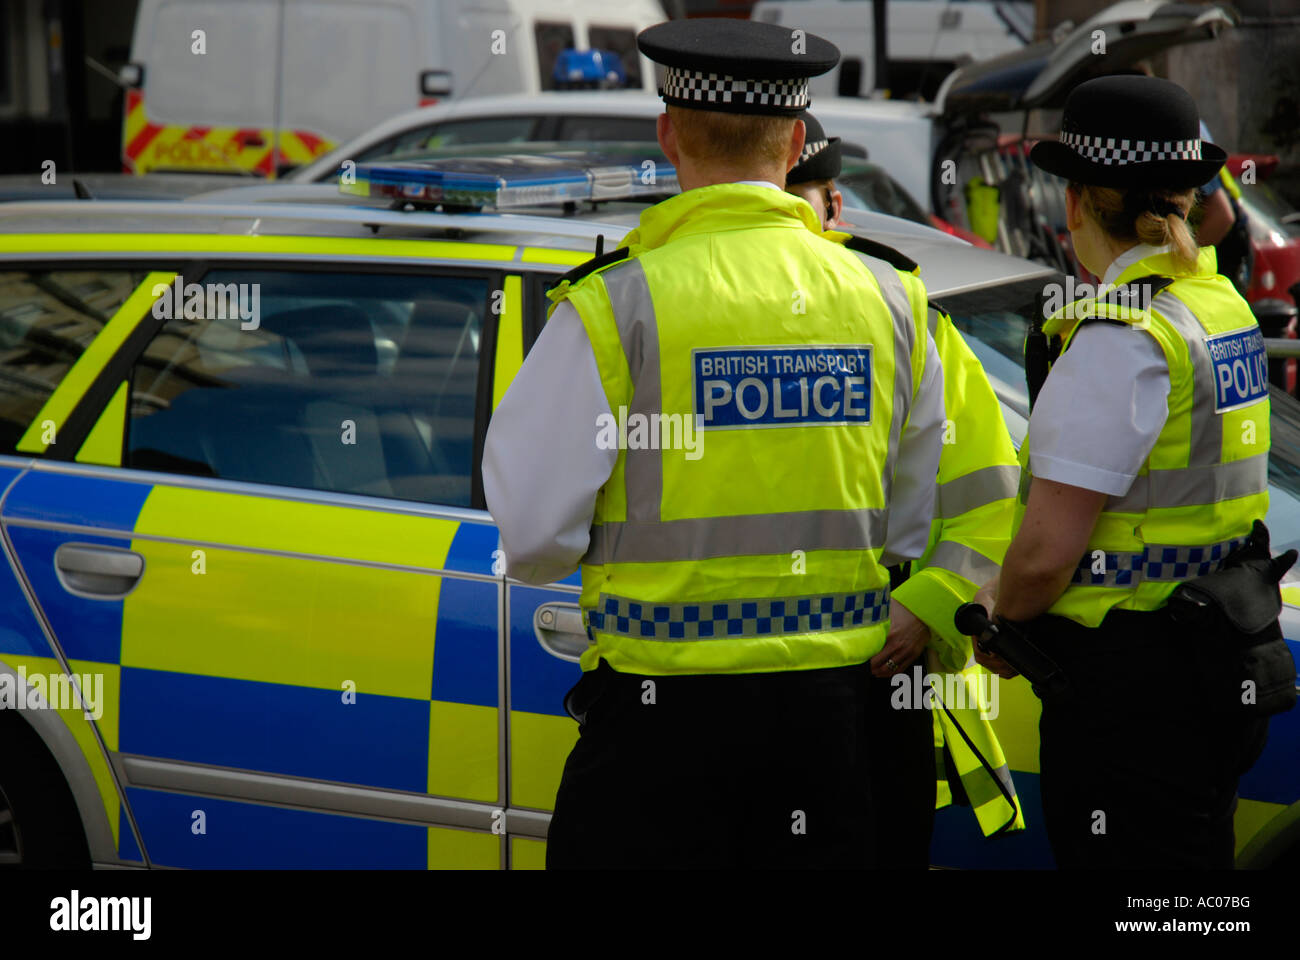 British transport police officers in yellow jackets standing next to yellow and blue coloured police car Stock Photo